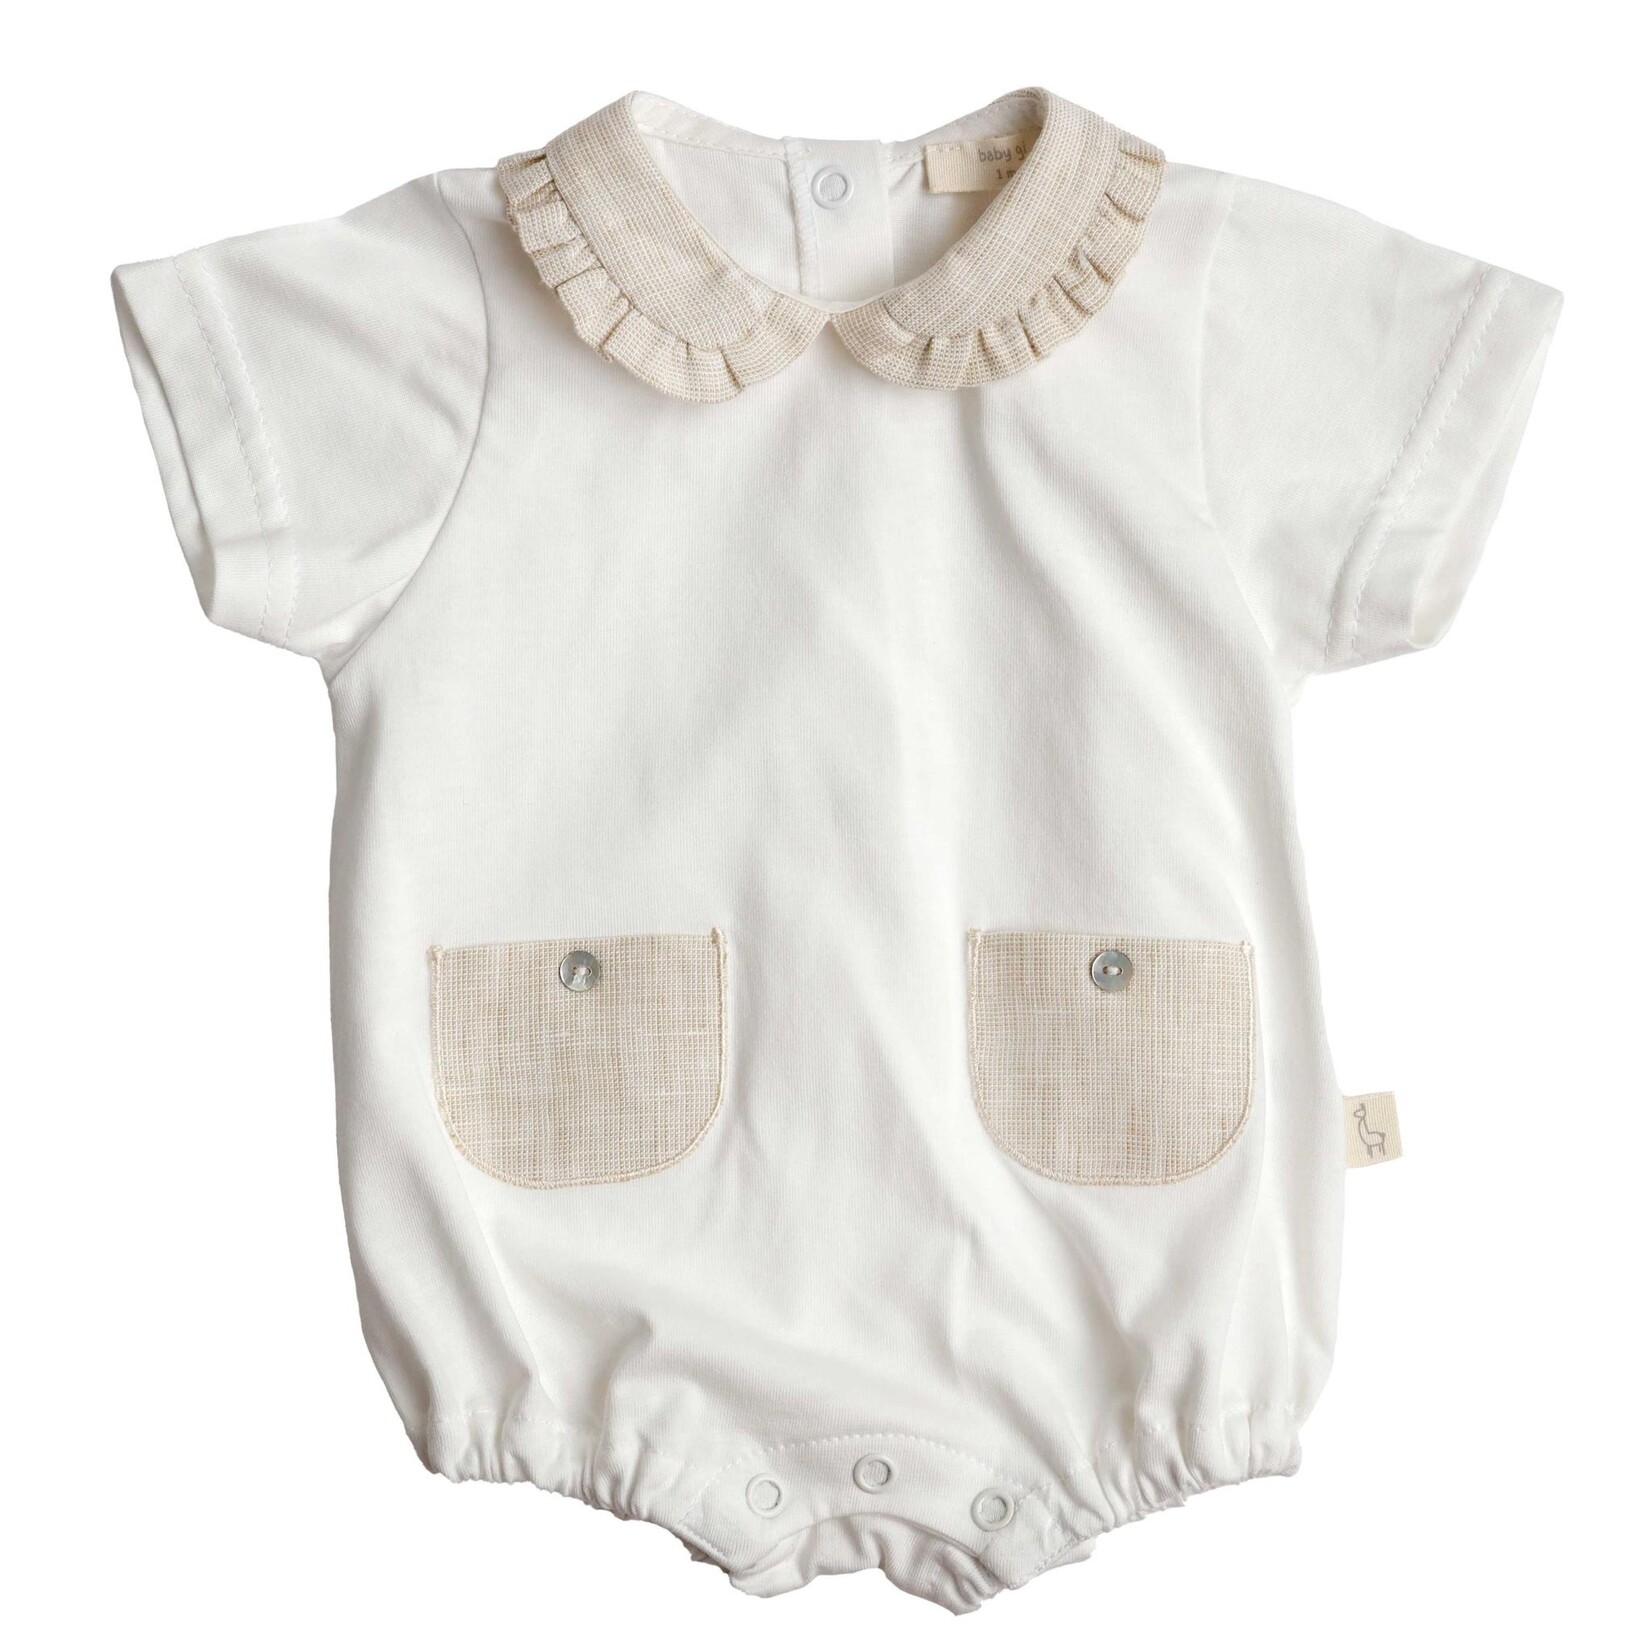 Baby Gi White Romper With Frilly Collar & Pockets - Cream Detail, Linen 6M